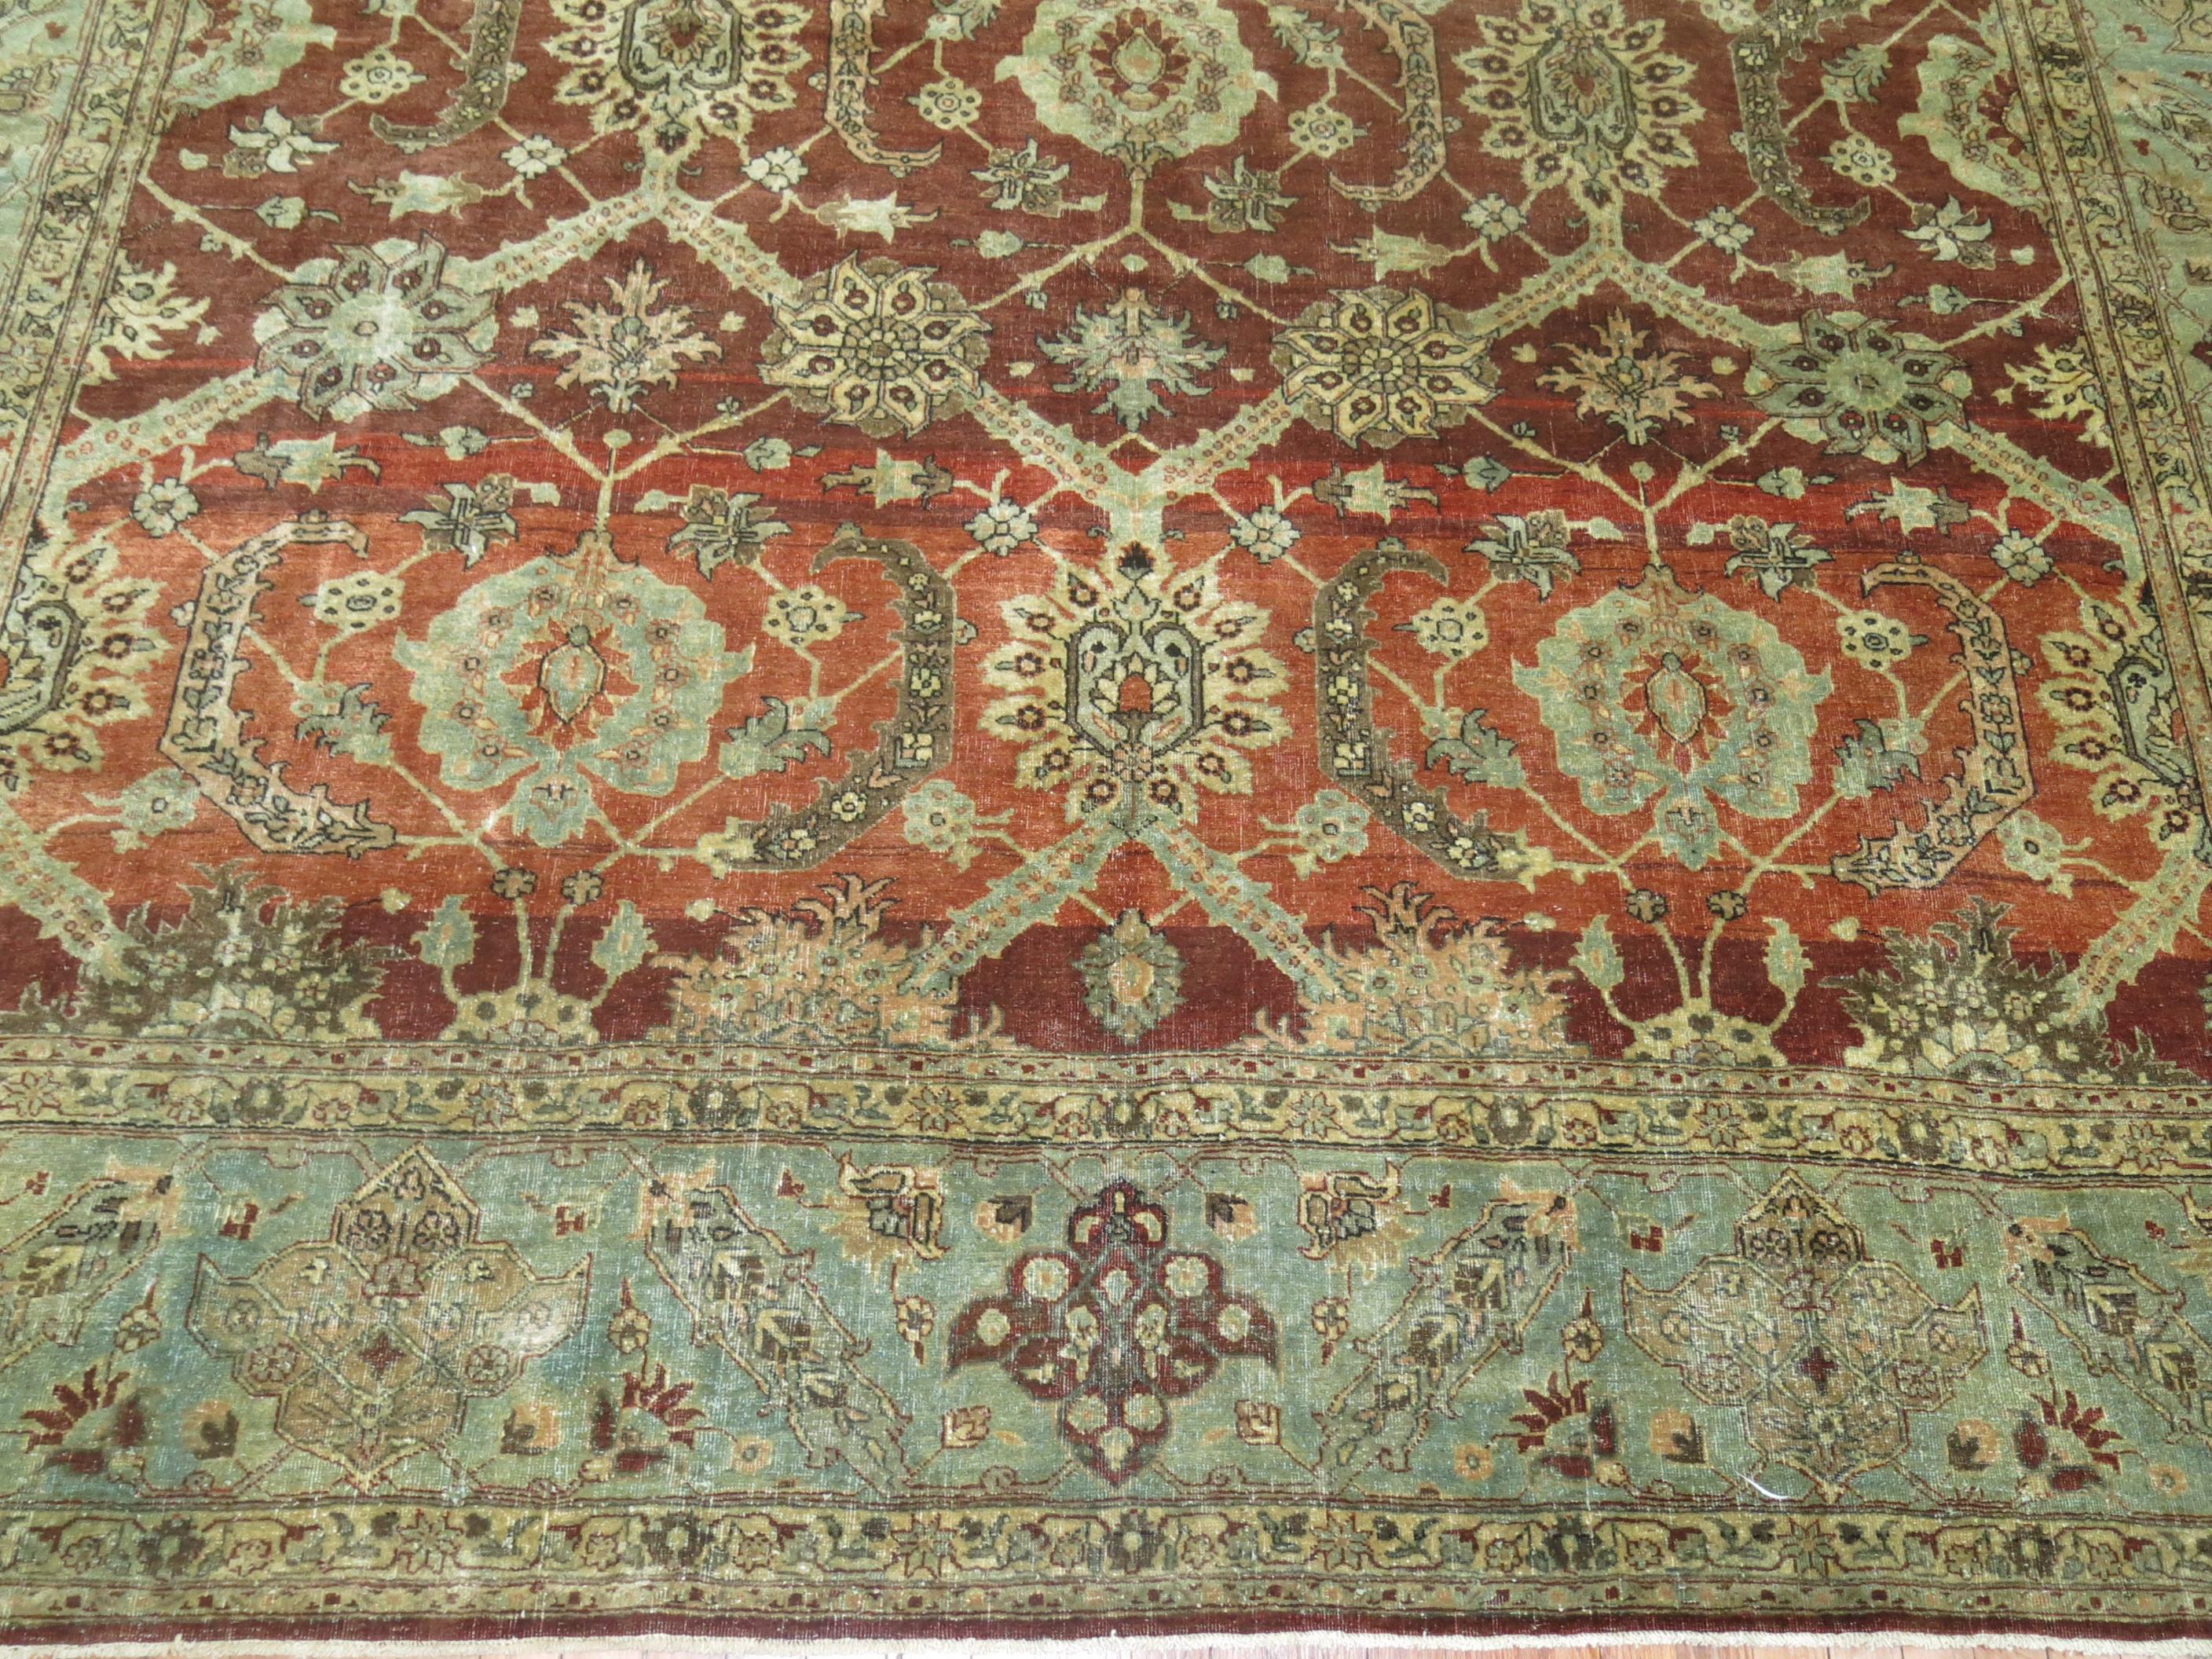 Authentic room size Persian Tabriz rug.

An antique Tabriz can be made of cotton or silk and woven as a pile carpet or flat-weave. A refined palette reliant on copper tones, terracotta and ivory, with shades of blue and subtle touches of gold,